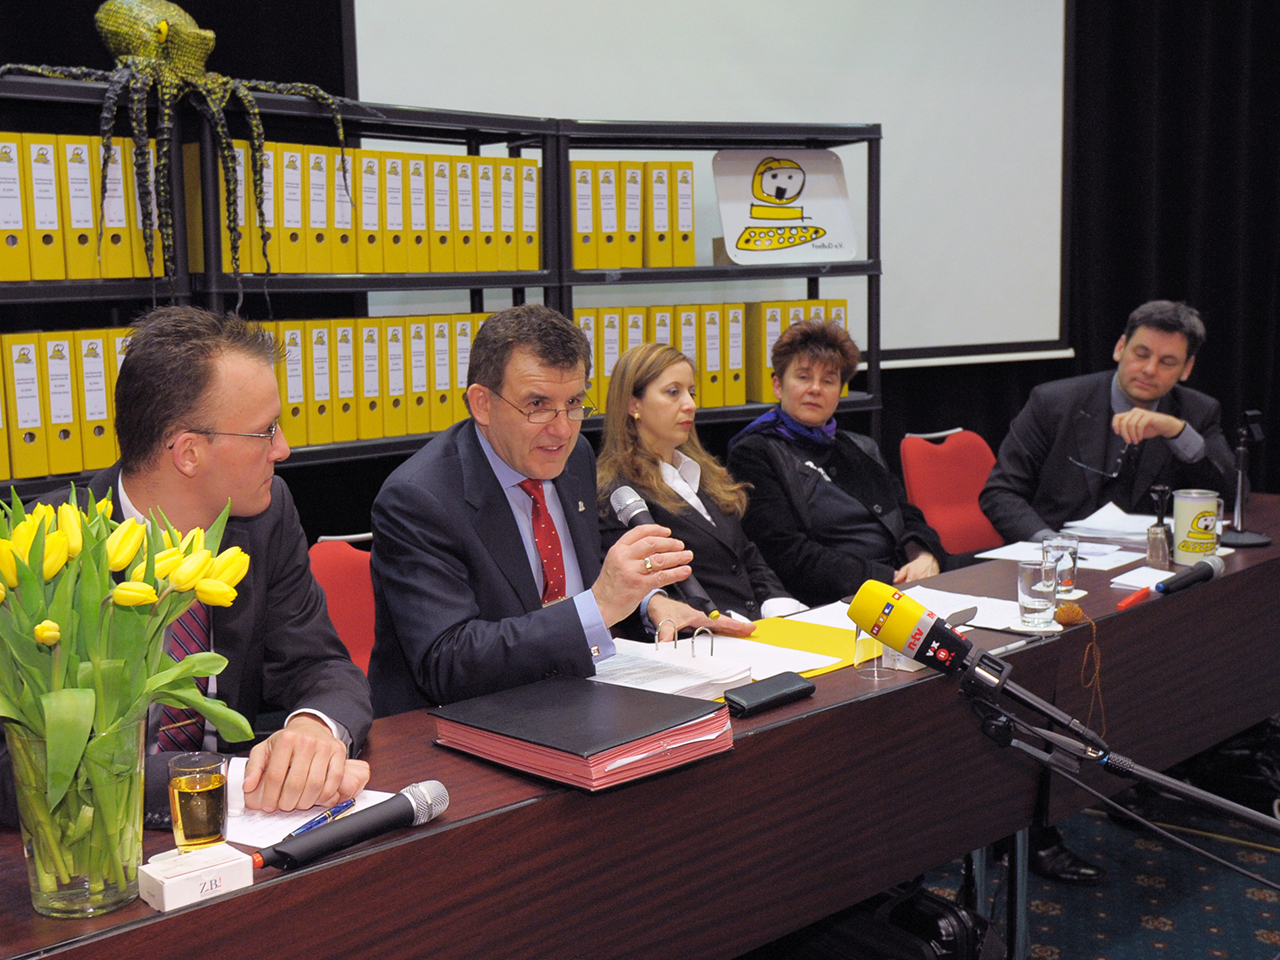 Rena Tangens and padeluun at a table at the press conference in front of a shelf with a lot of yellow folders